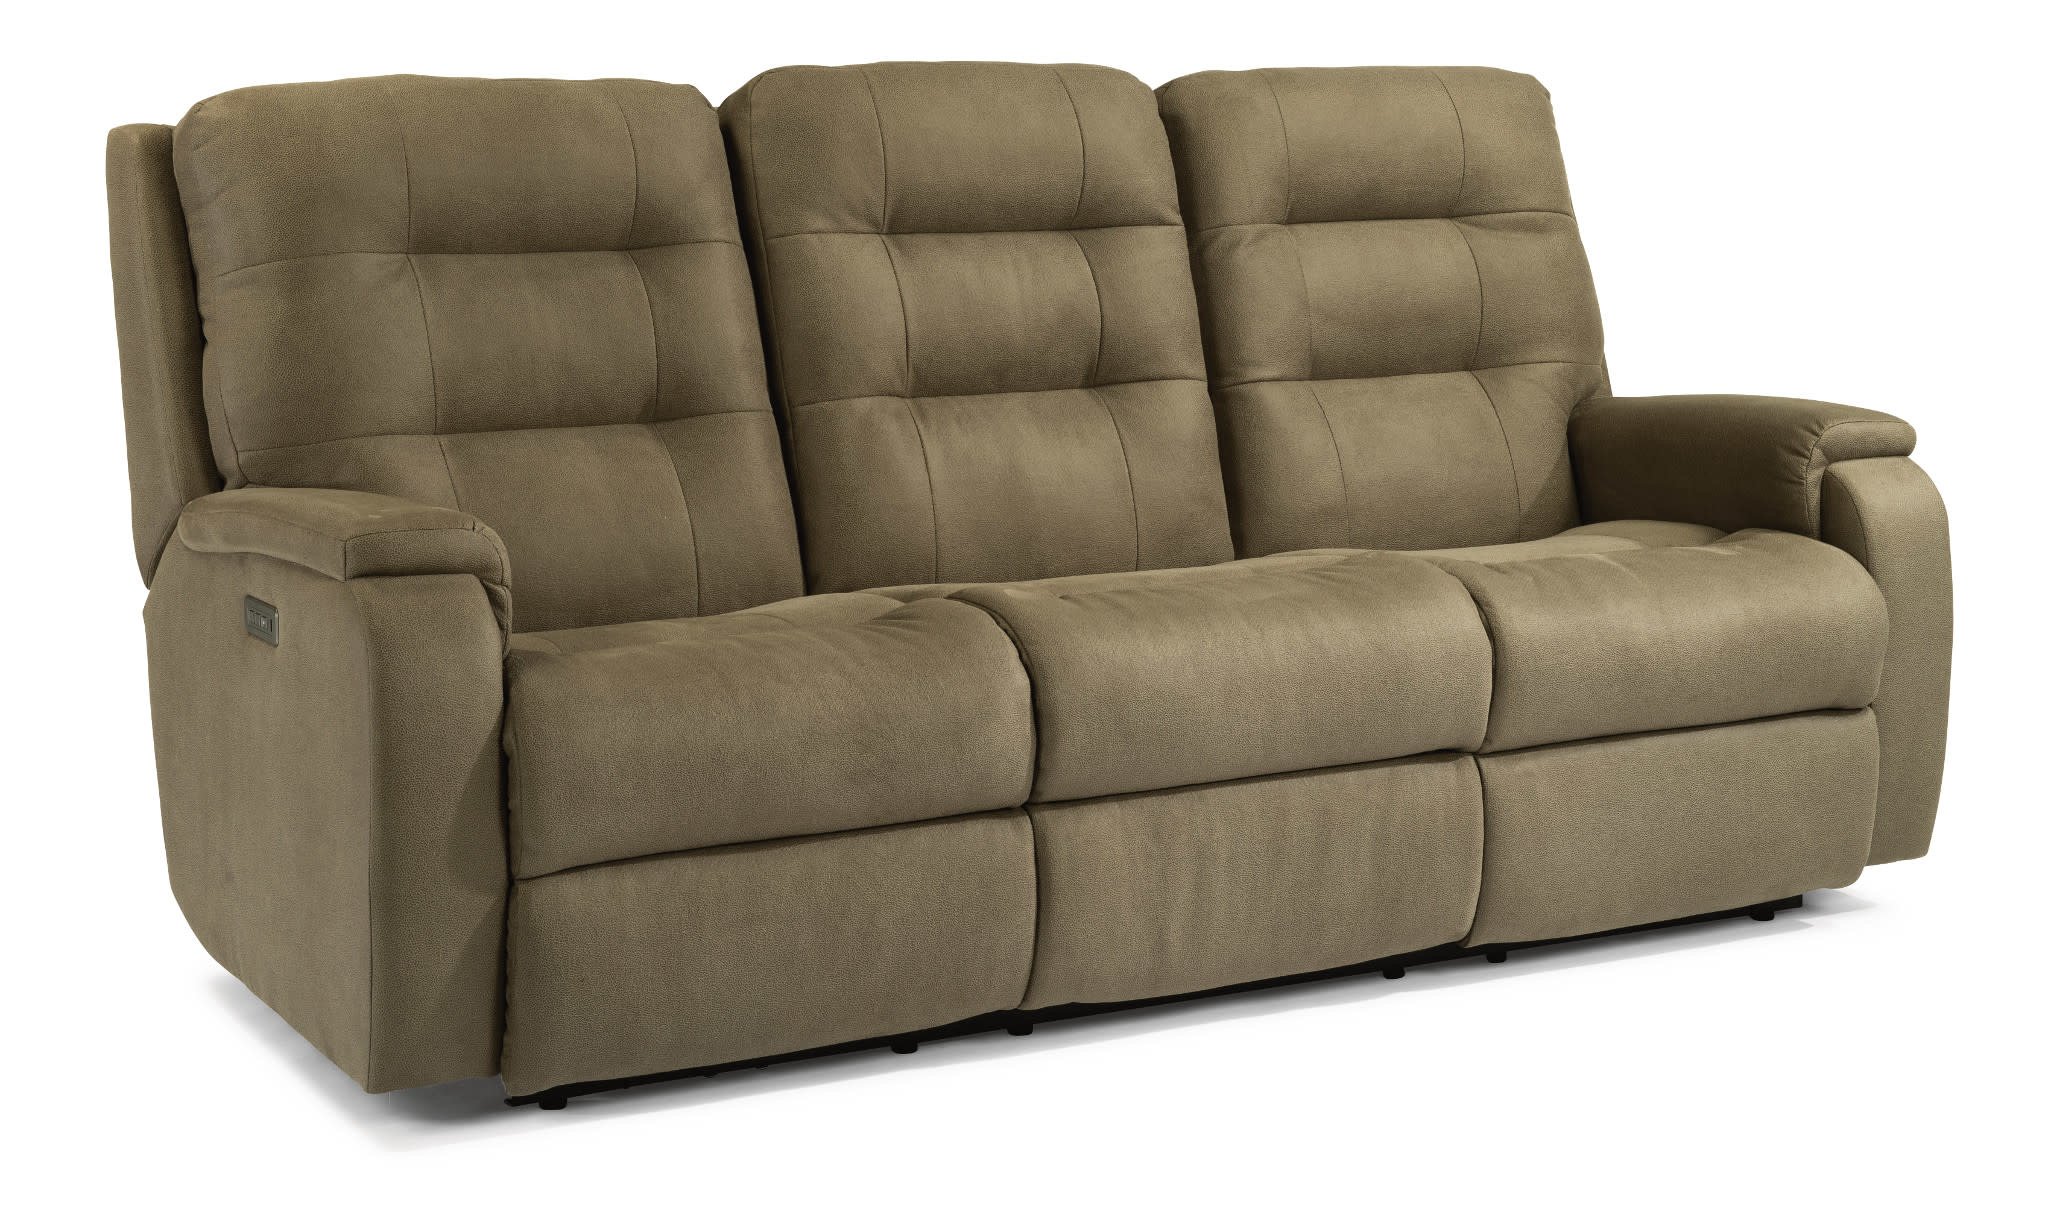 Arlo Power Reclining Sofa With, Haven Top Grain Leather Power Reclining Sofa Set